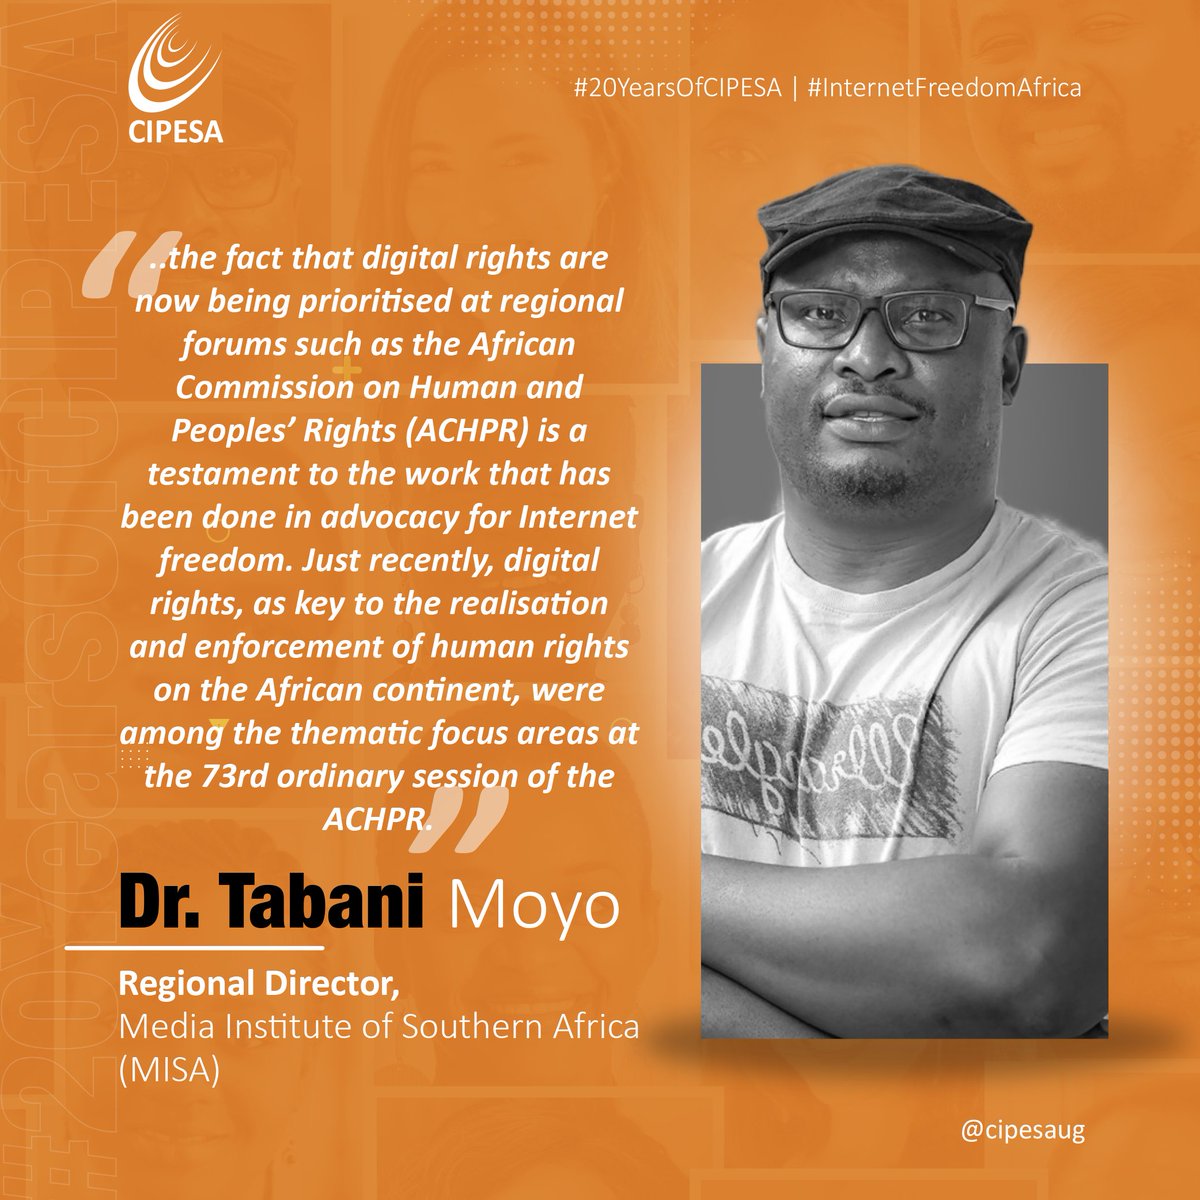 📢Today, we launch the report 🌟A Decade of Digital Rights in Africa: Reflections and Insights from 10 Change Makers 🌟 @TabaniMoyo of @MISARegional made a contribution to the report here: rb.gy/qcfjld #InternetFreedomAfrica #20YearsOfCIPESA